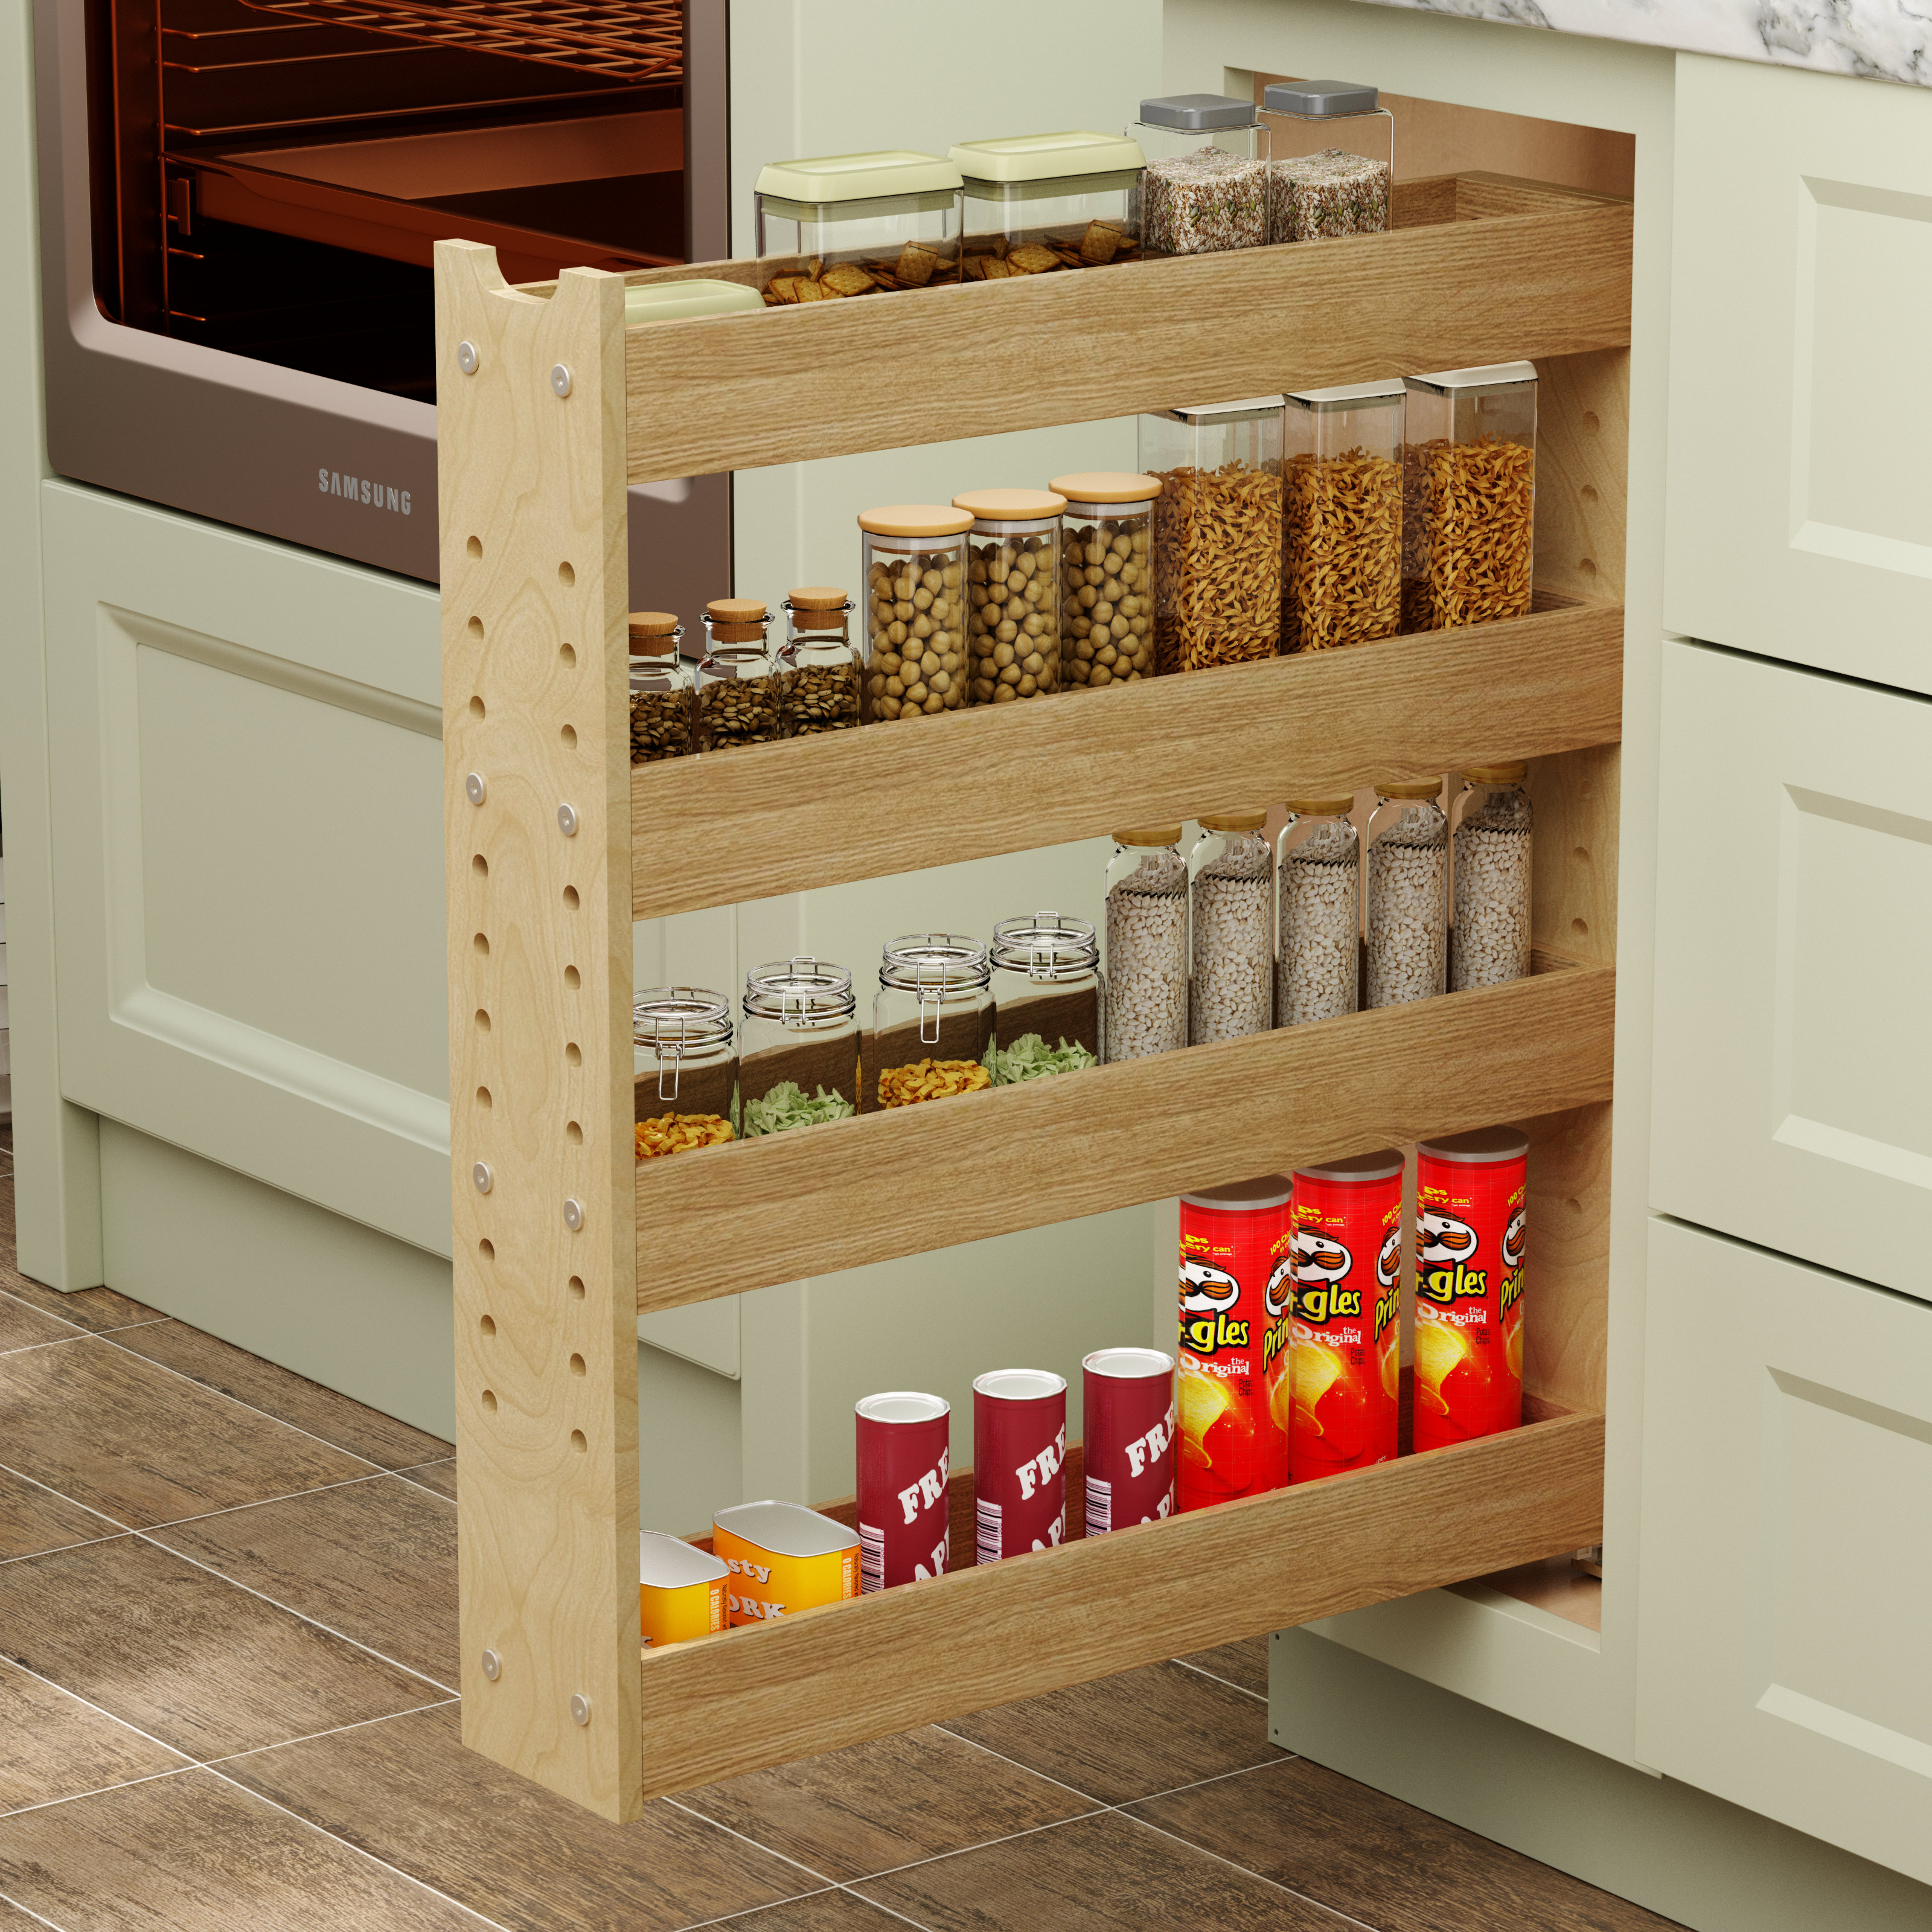 Vertical Spice - Cabinet Mounted Spice Rack Organizer - 3 Drawers, 30 Capacity - Sliding Cabinet Organizer - Pullout Shelves for Pantry Organization